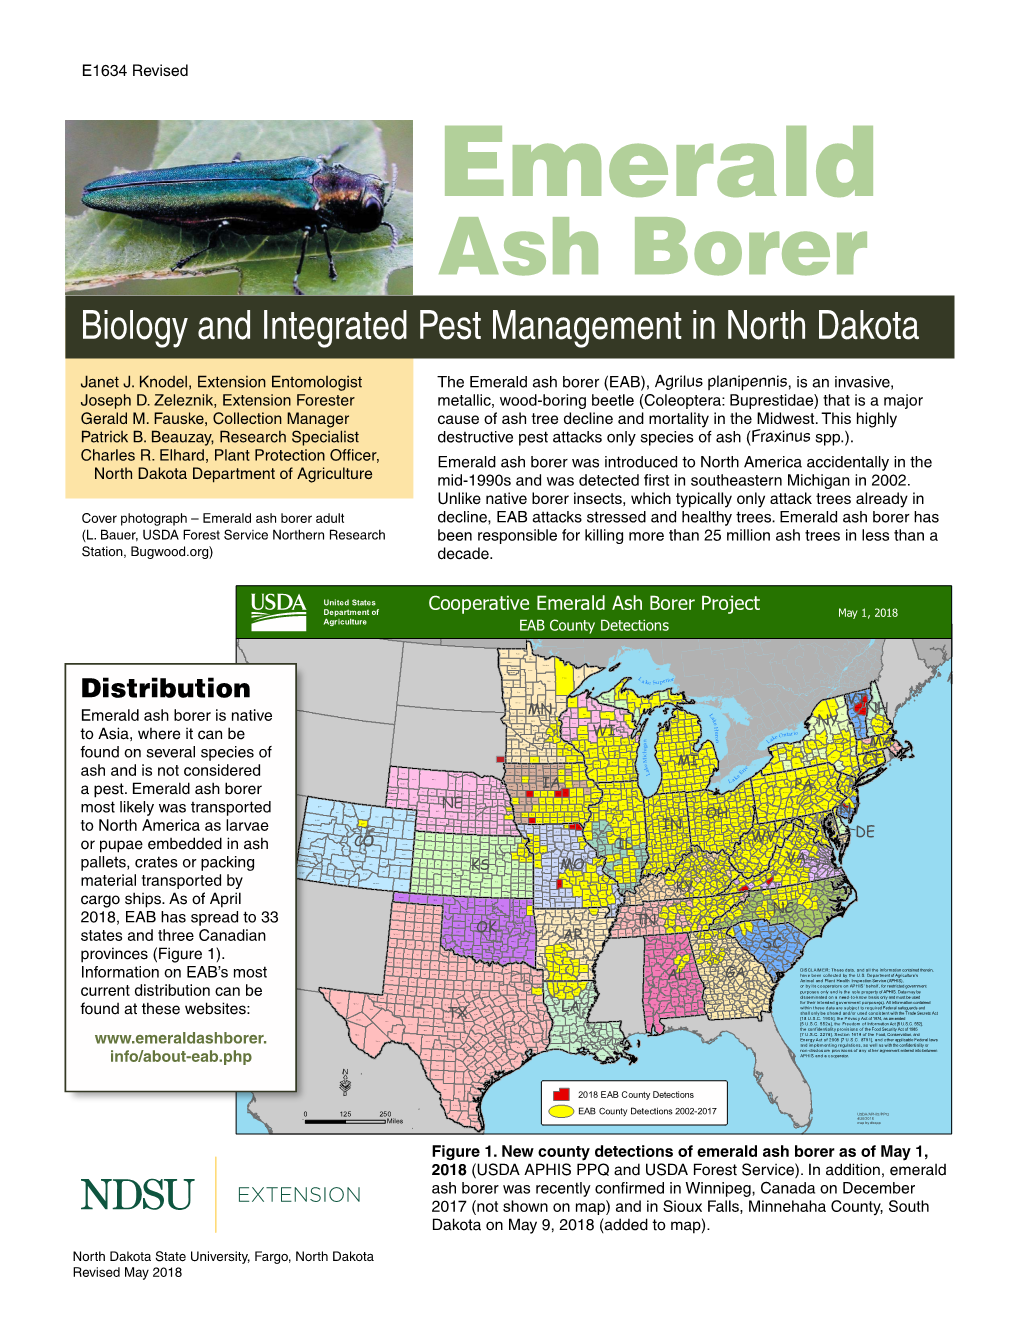 E1634 Emerald Ash Borer: Biology and Integrated Pest Management In